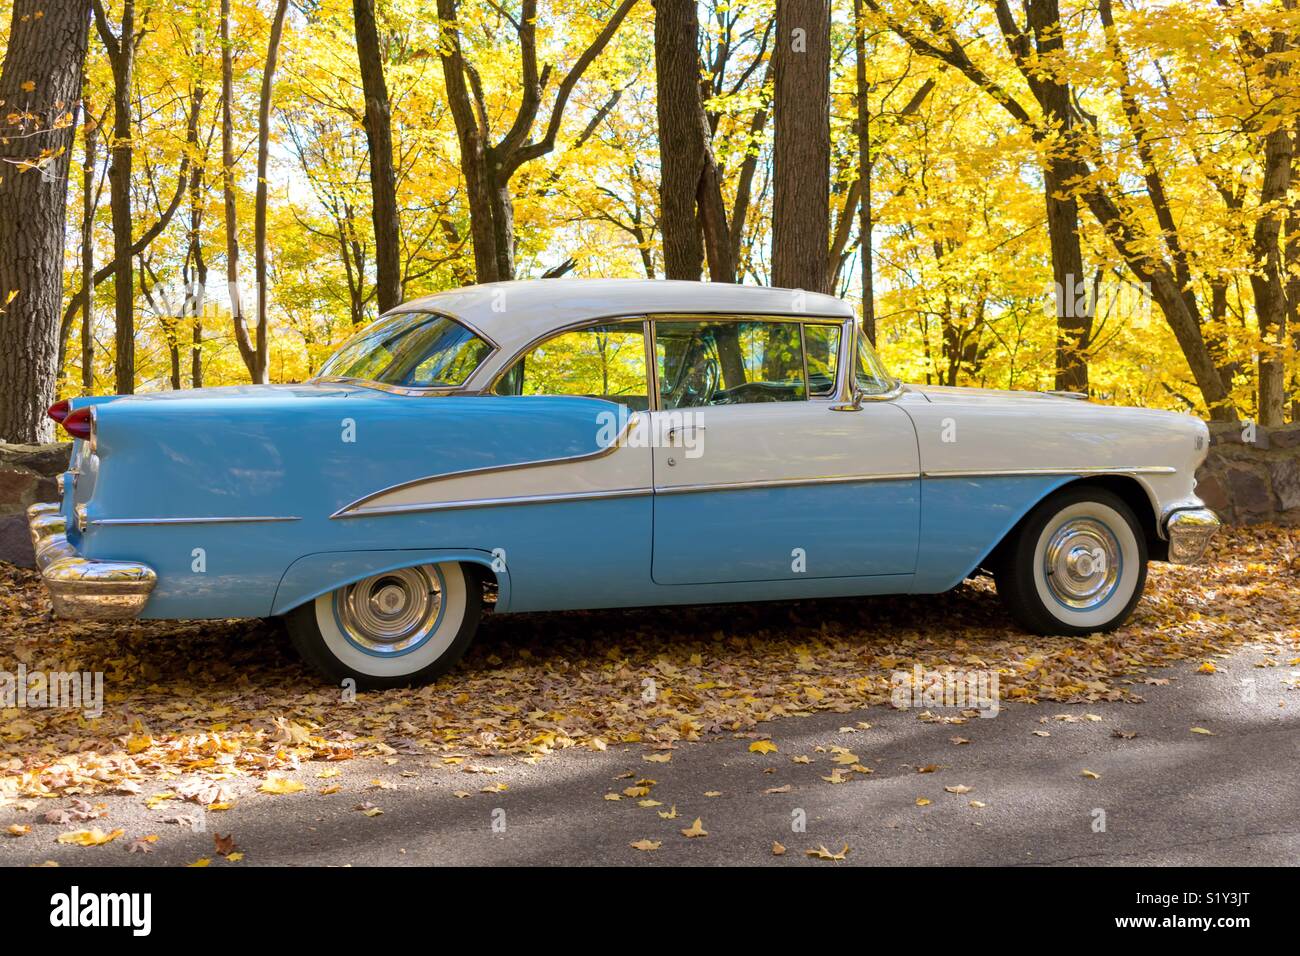 Mint condition classic car against backdrop of colorful autumn leaves Stock Photo